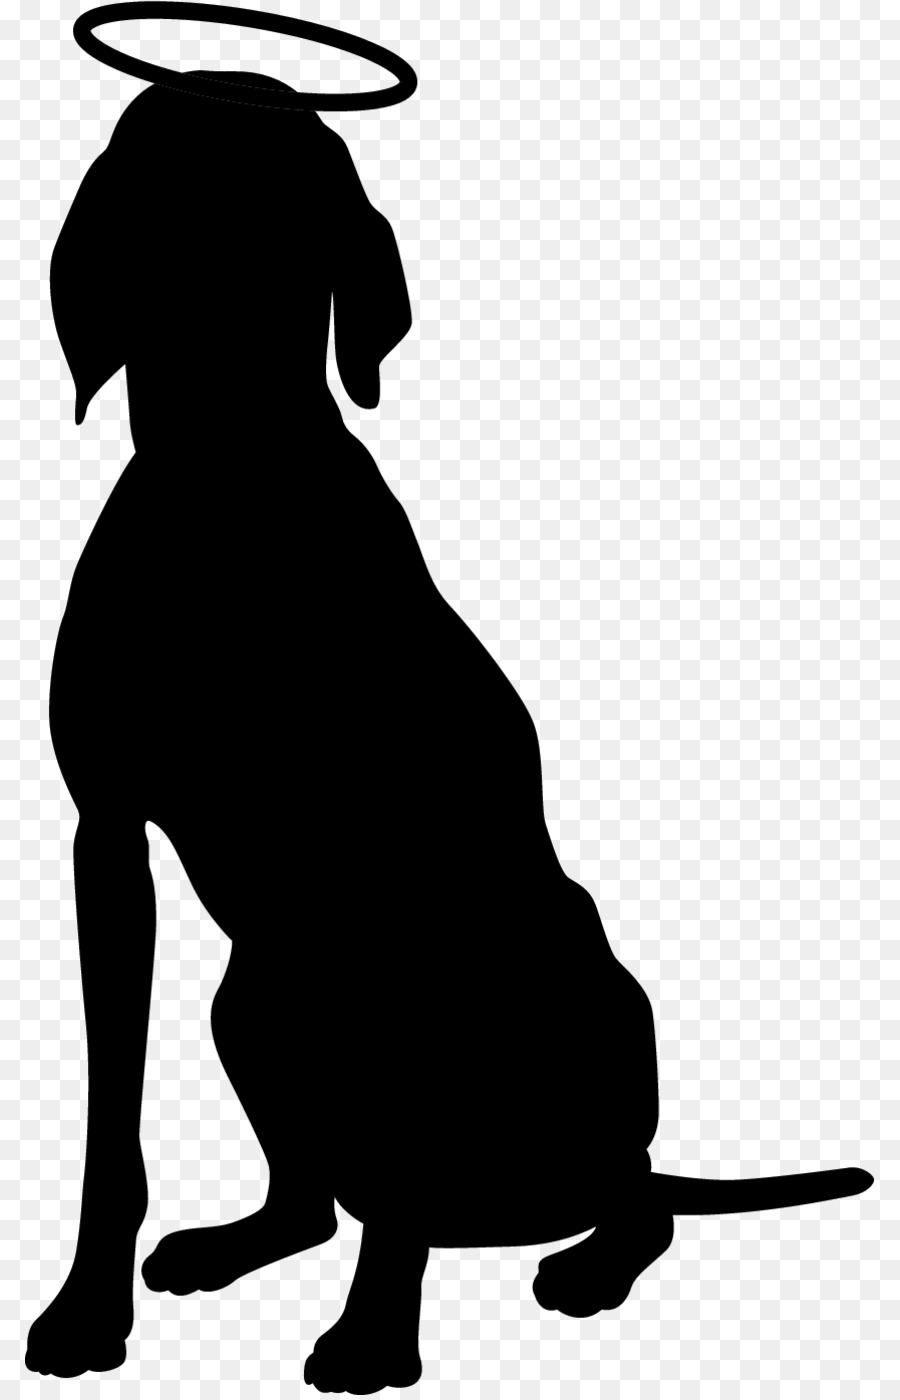 The weimaraner English Setter German Shorthaired Pointer Clip art - Silhouette png download - 850*1395 - Free Transparent Weimaraner png Download.